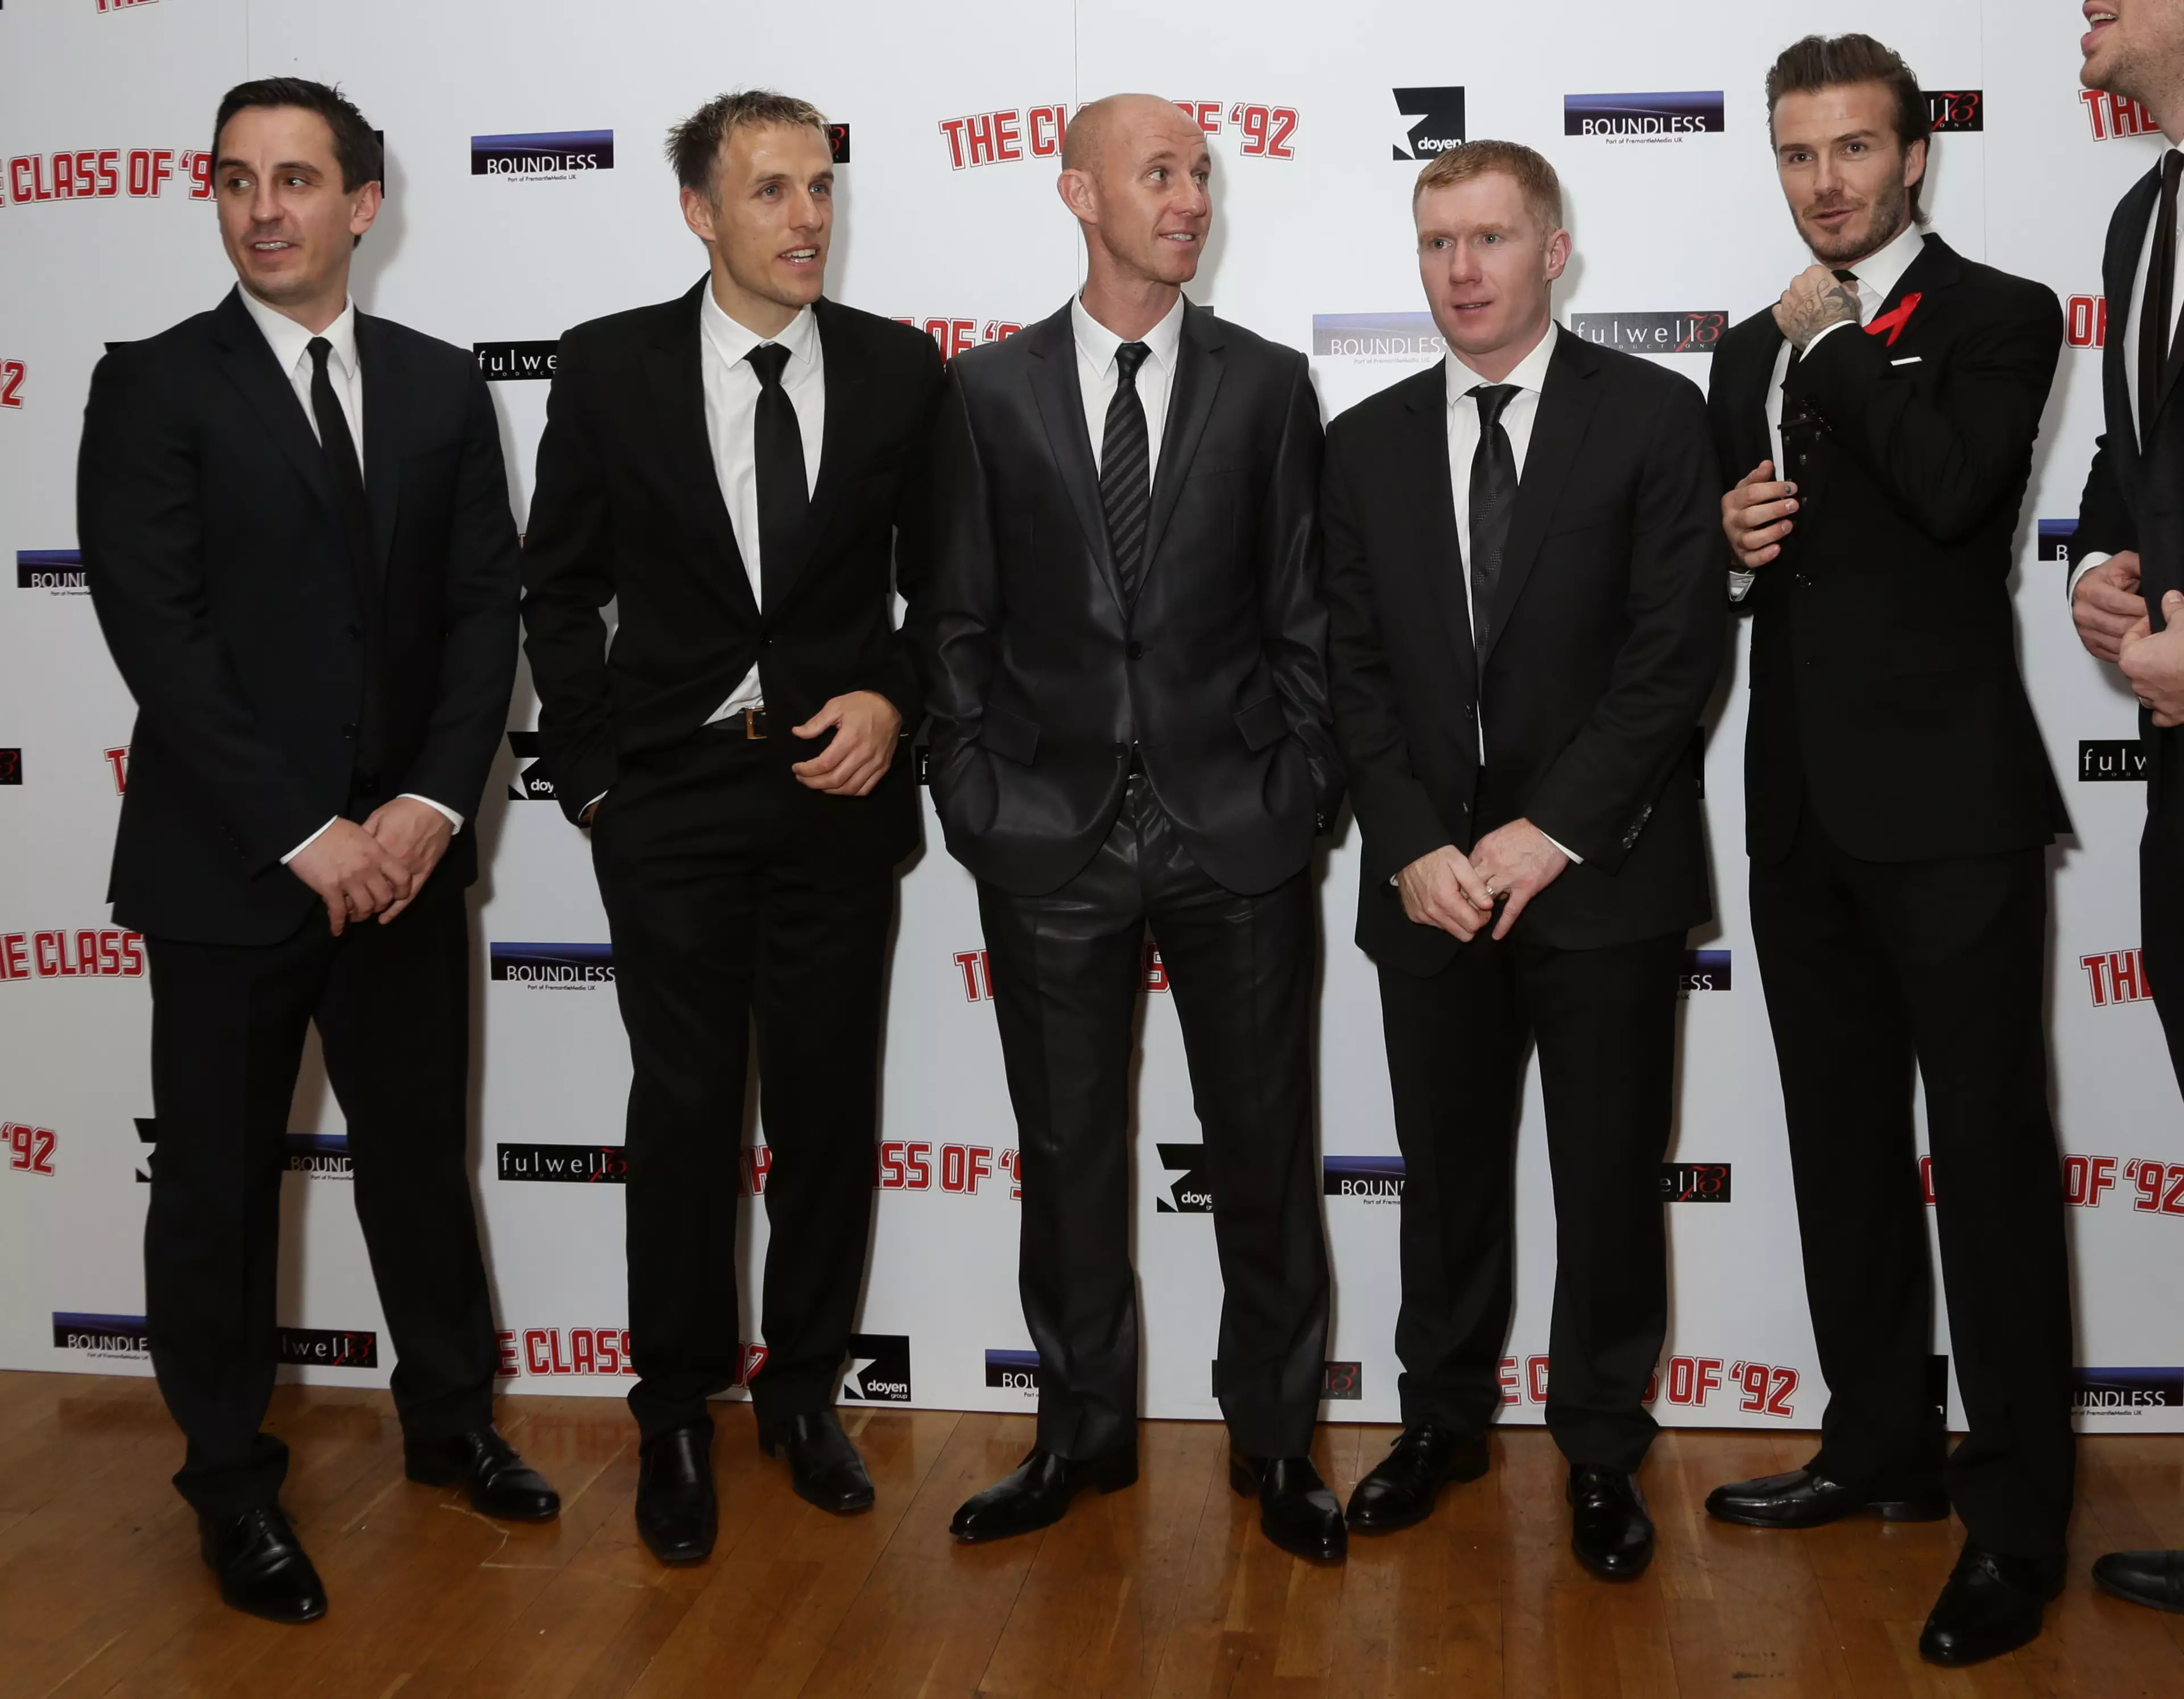 The Class Of 92. Image: PA Images